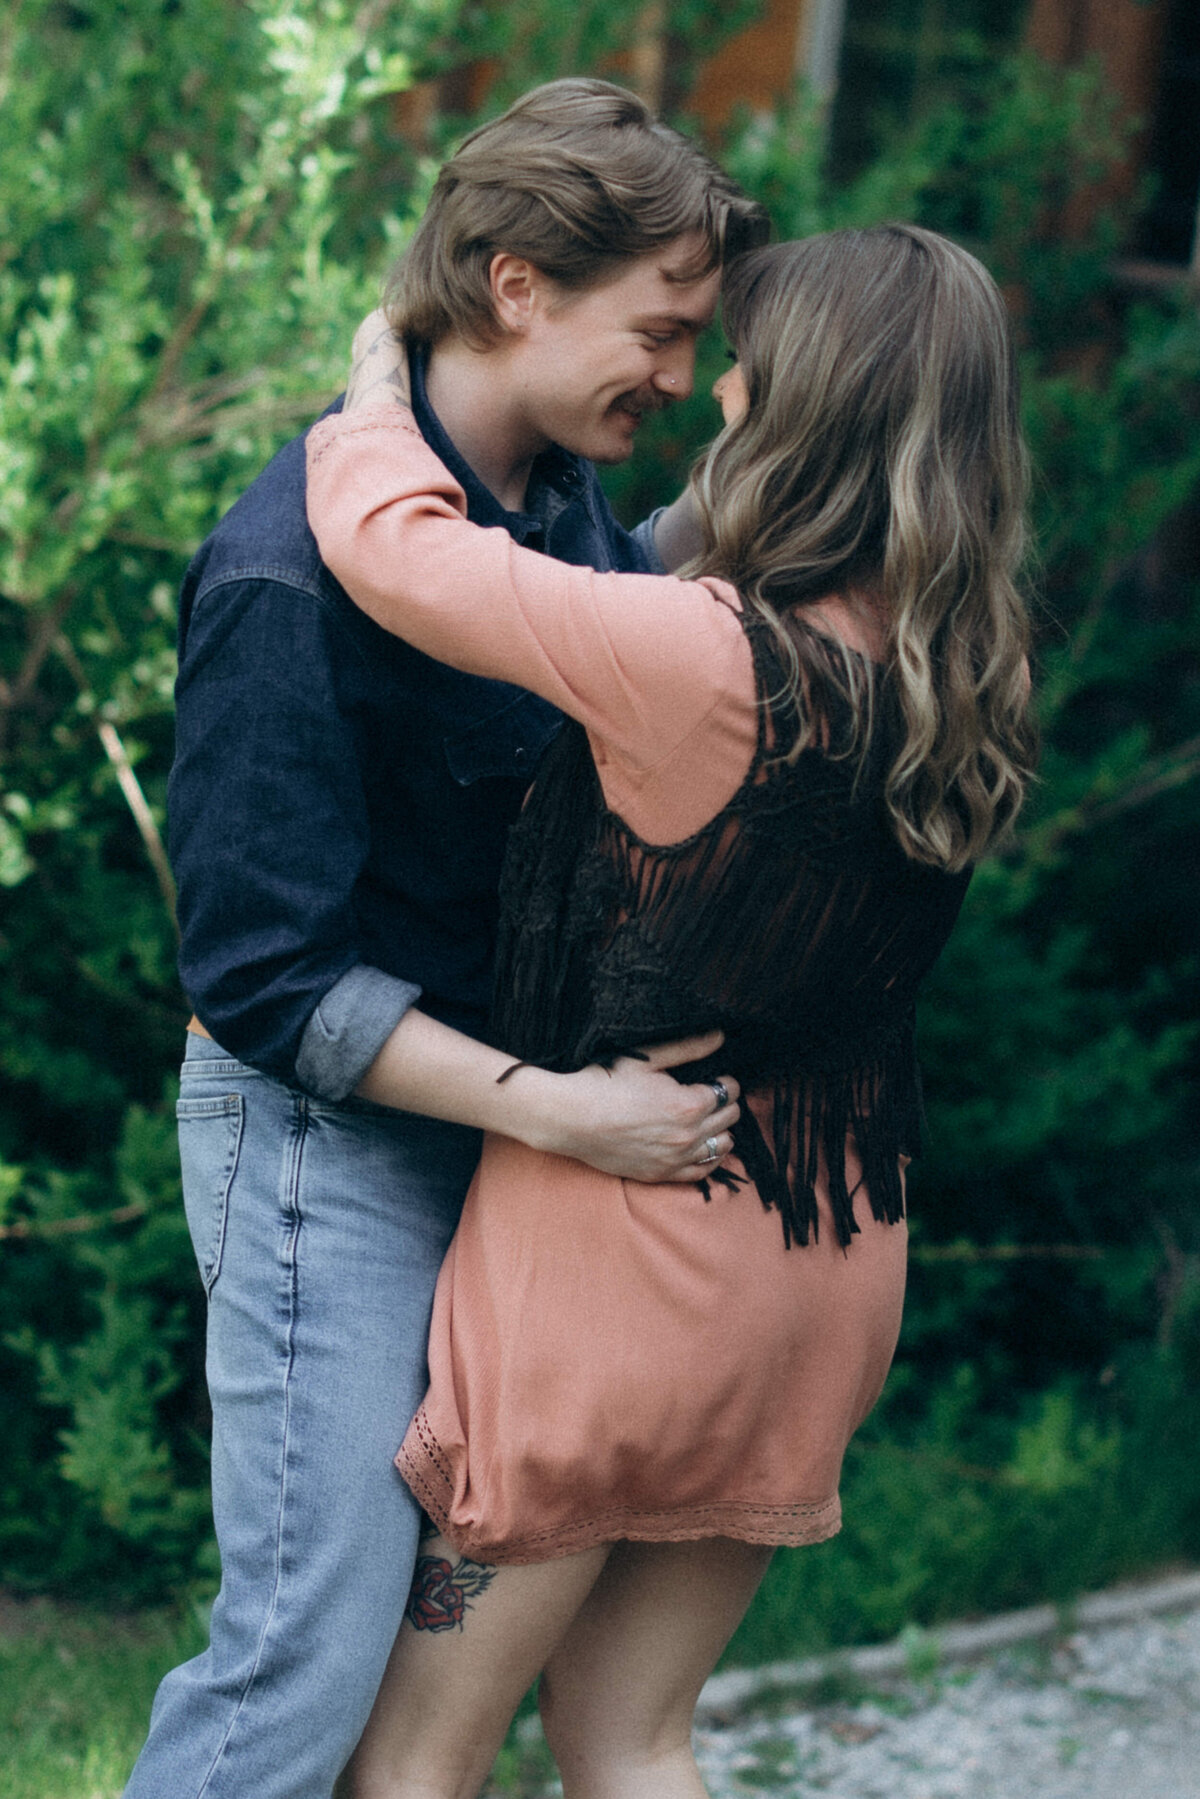 vpc-couples-vintage-cabin-shoot-19